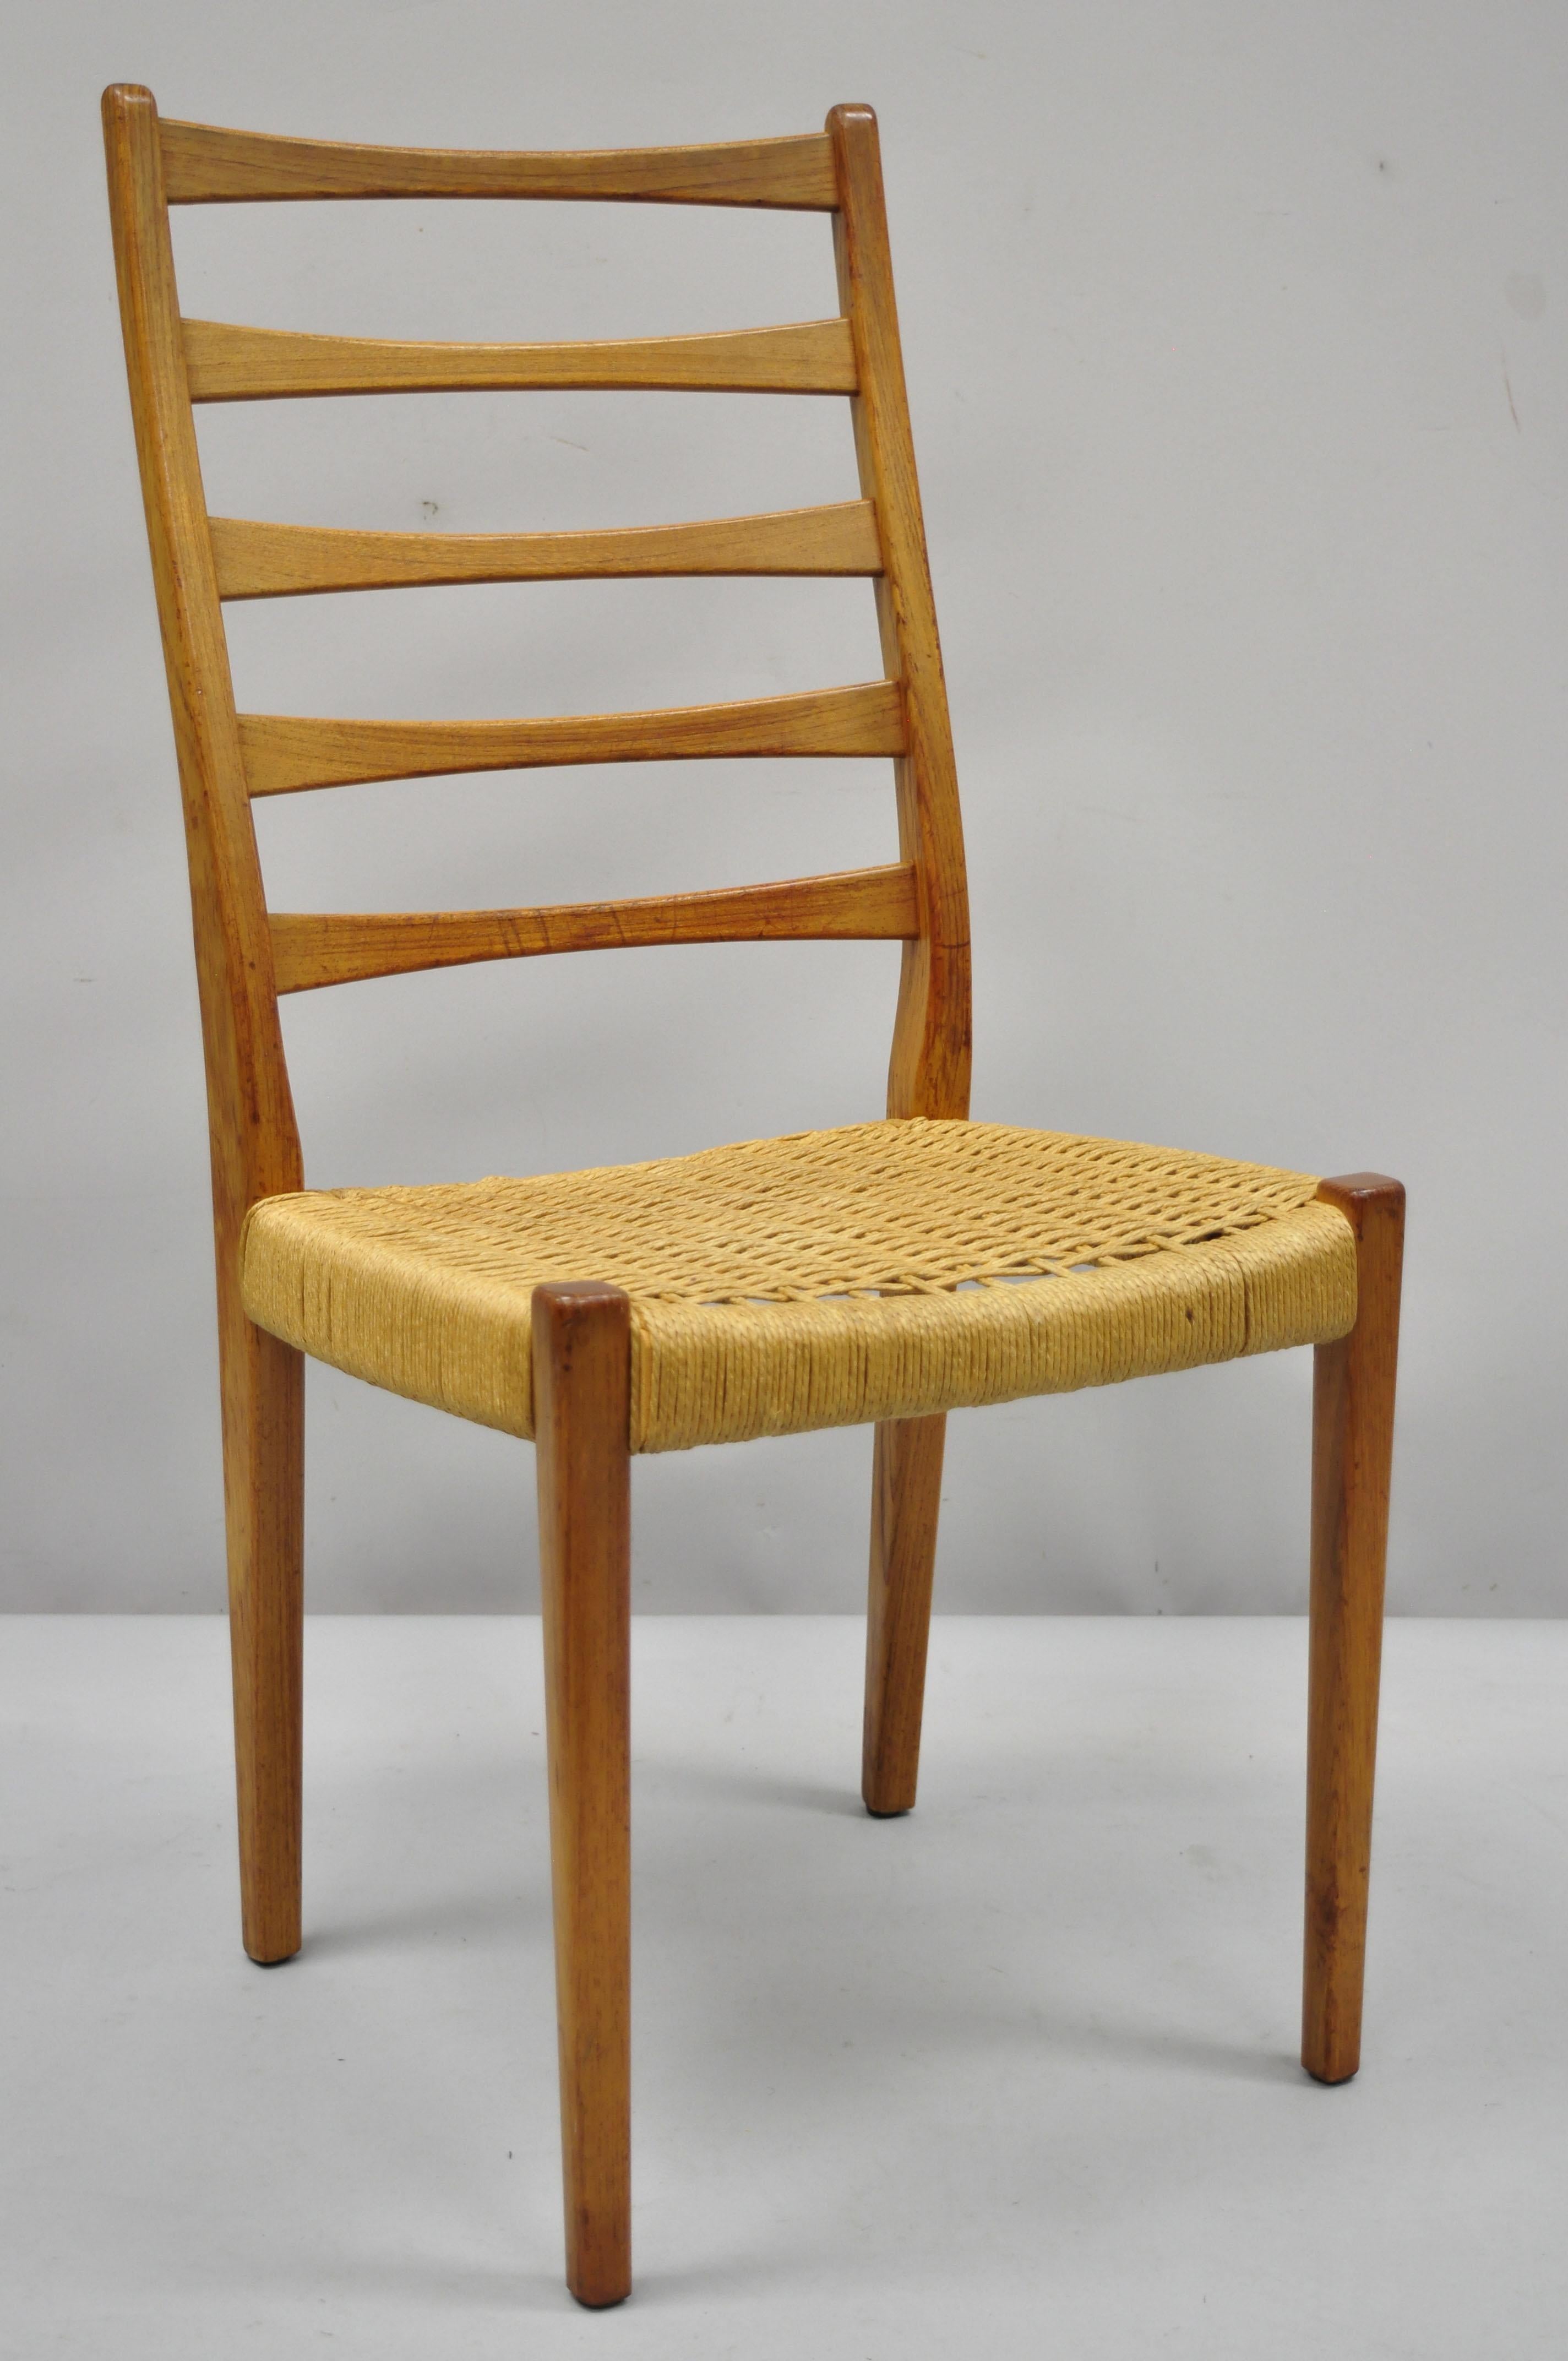 Four vintage midcentury Danish Swedish modern Svegards Markaryd dining chairs. Item features woven rope seat, solid wood frame, beautiful wood grain, original stamp, tapered legs, clean modernist lines, quality craftsmanship, circa mid-20th century.